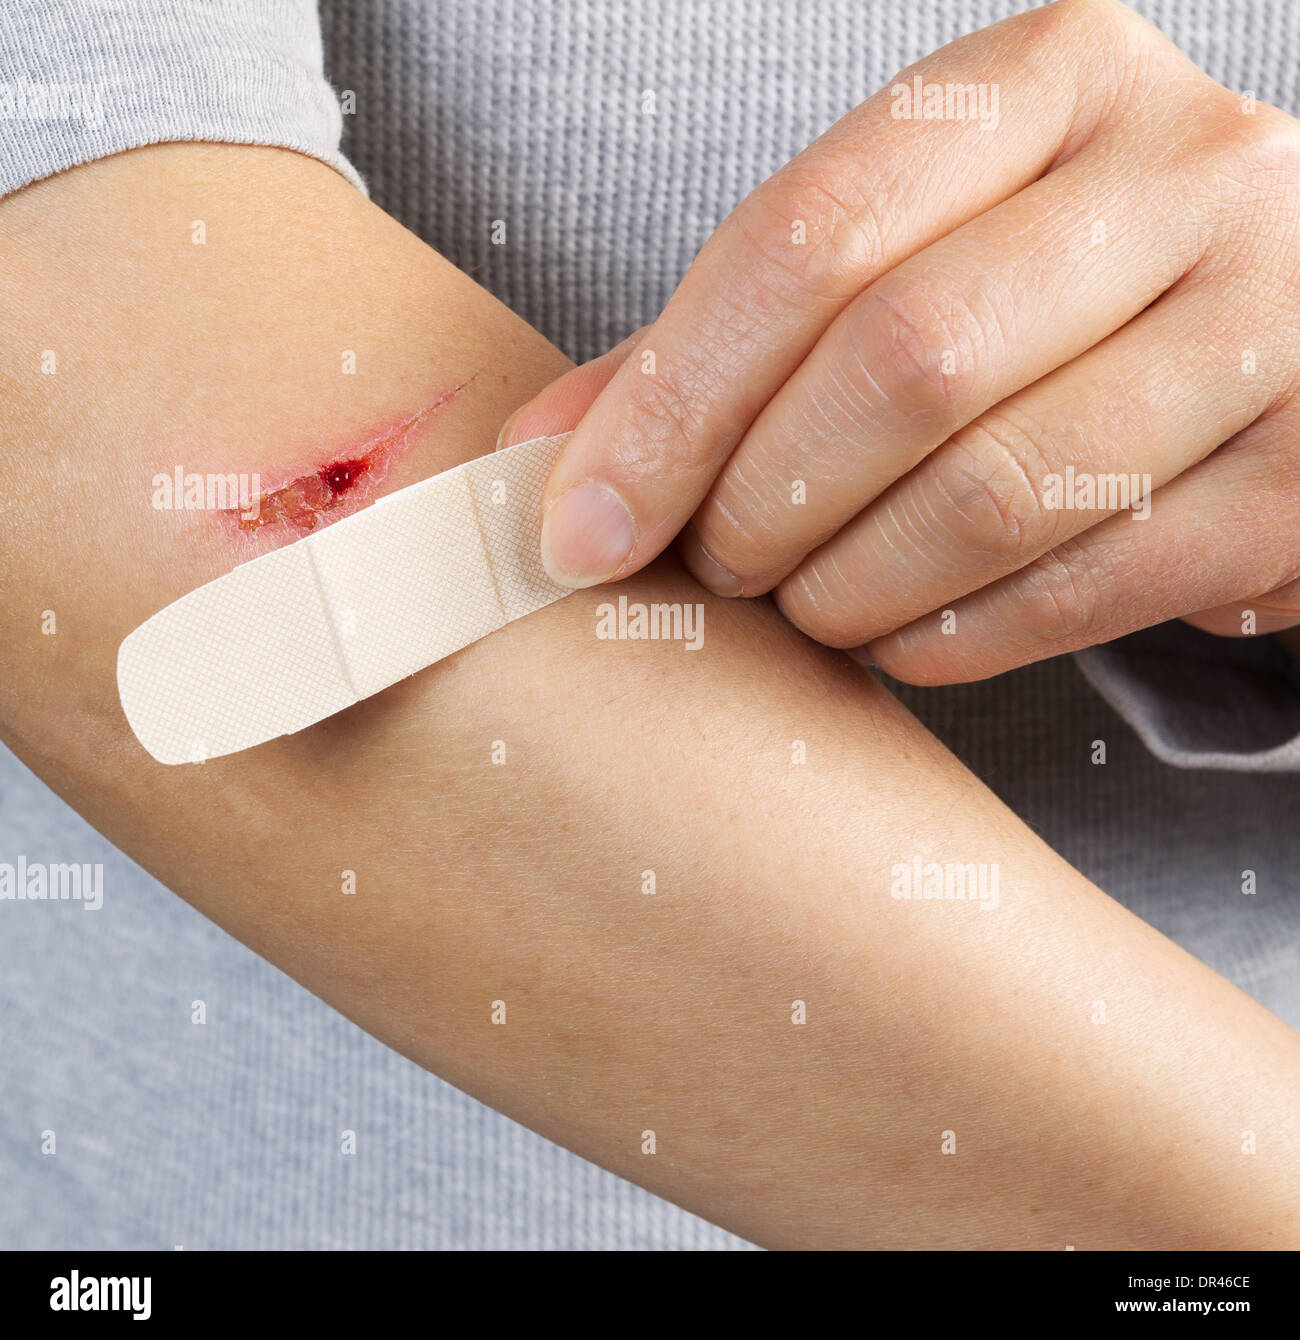 Photo of female hand showing band aid next to cut on forearm Stock Photo